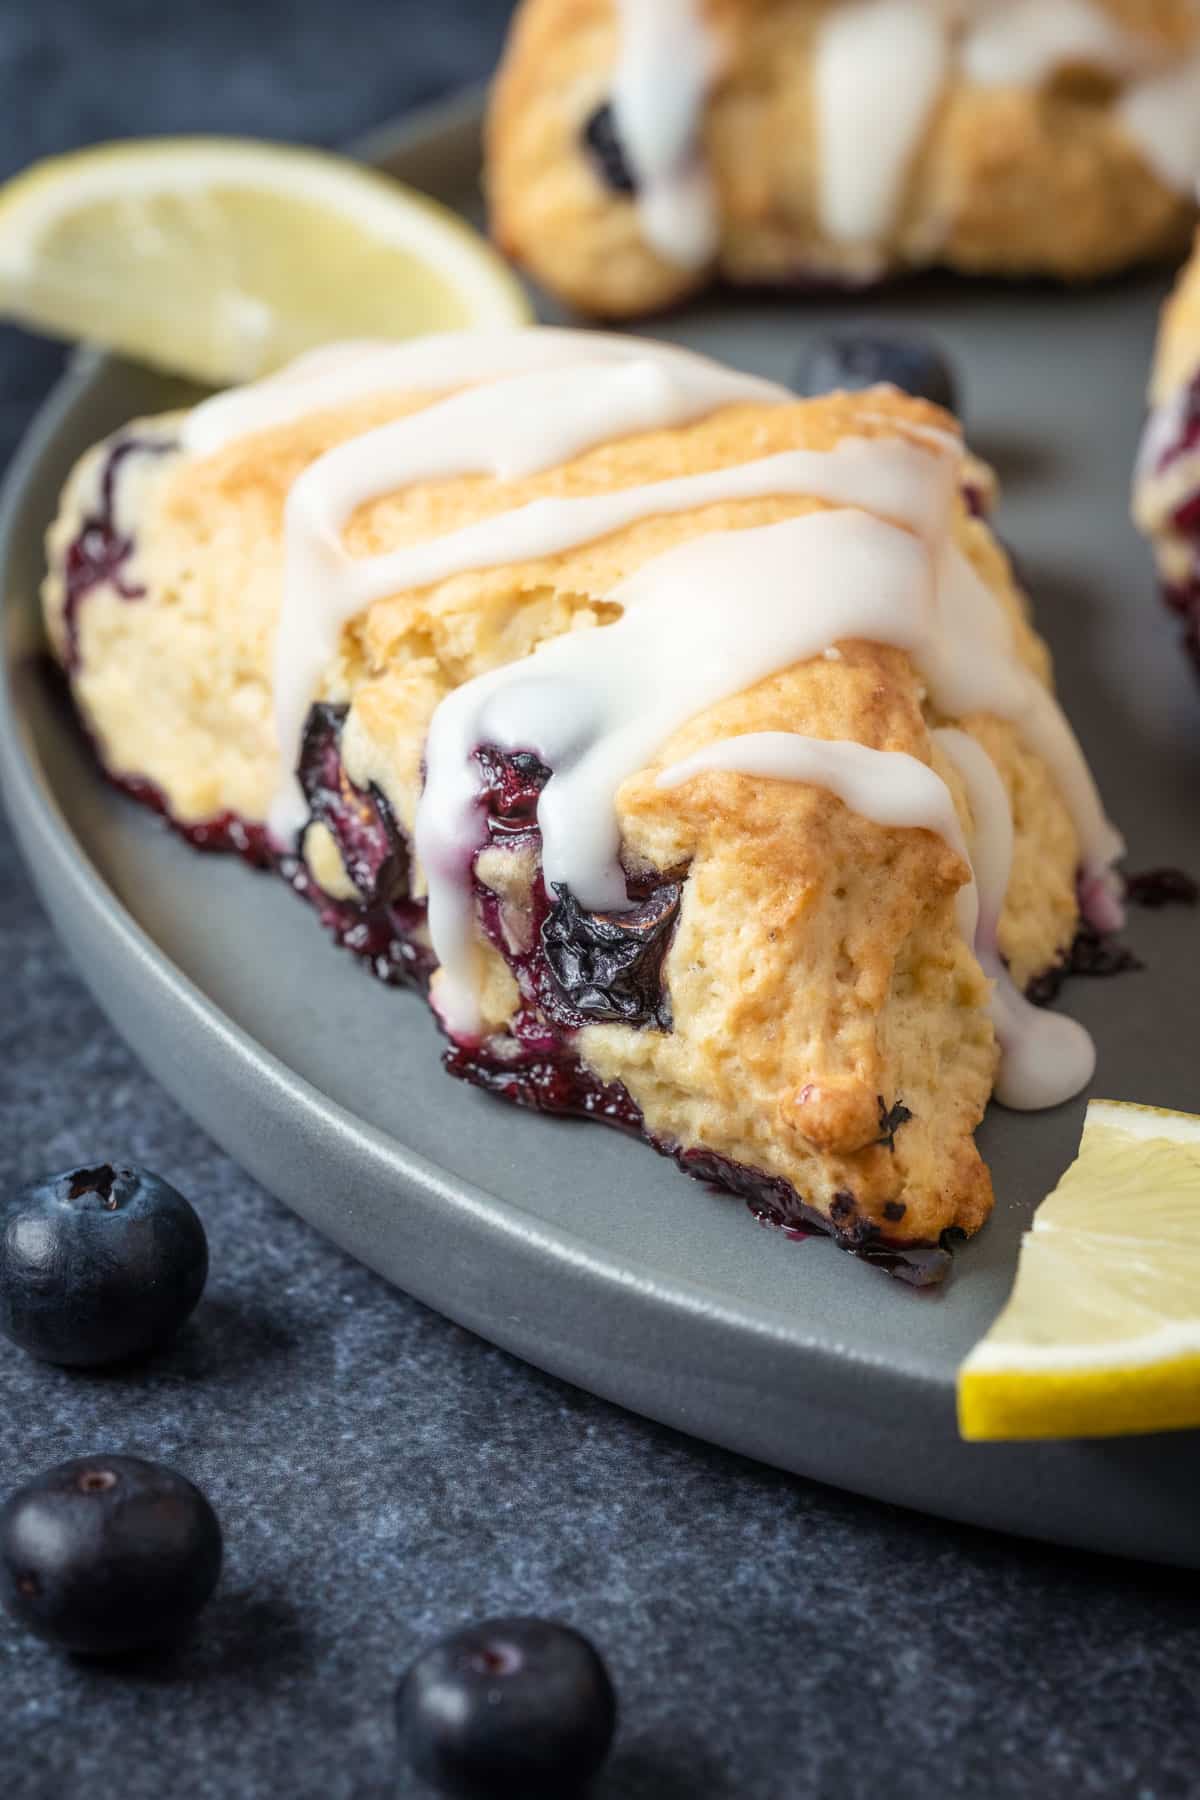 Glazed blueberry scones on a gray plate.